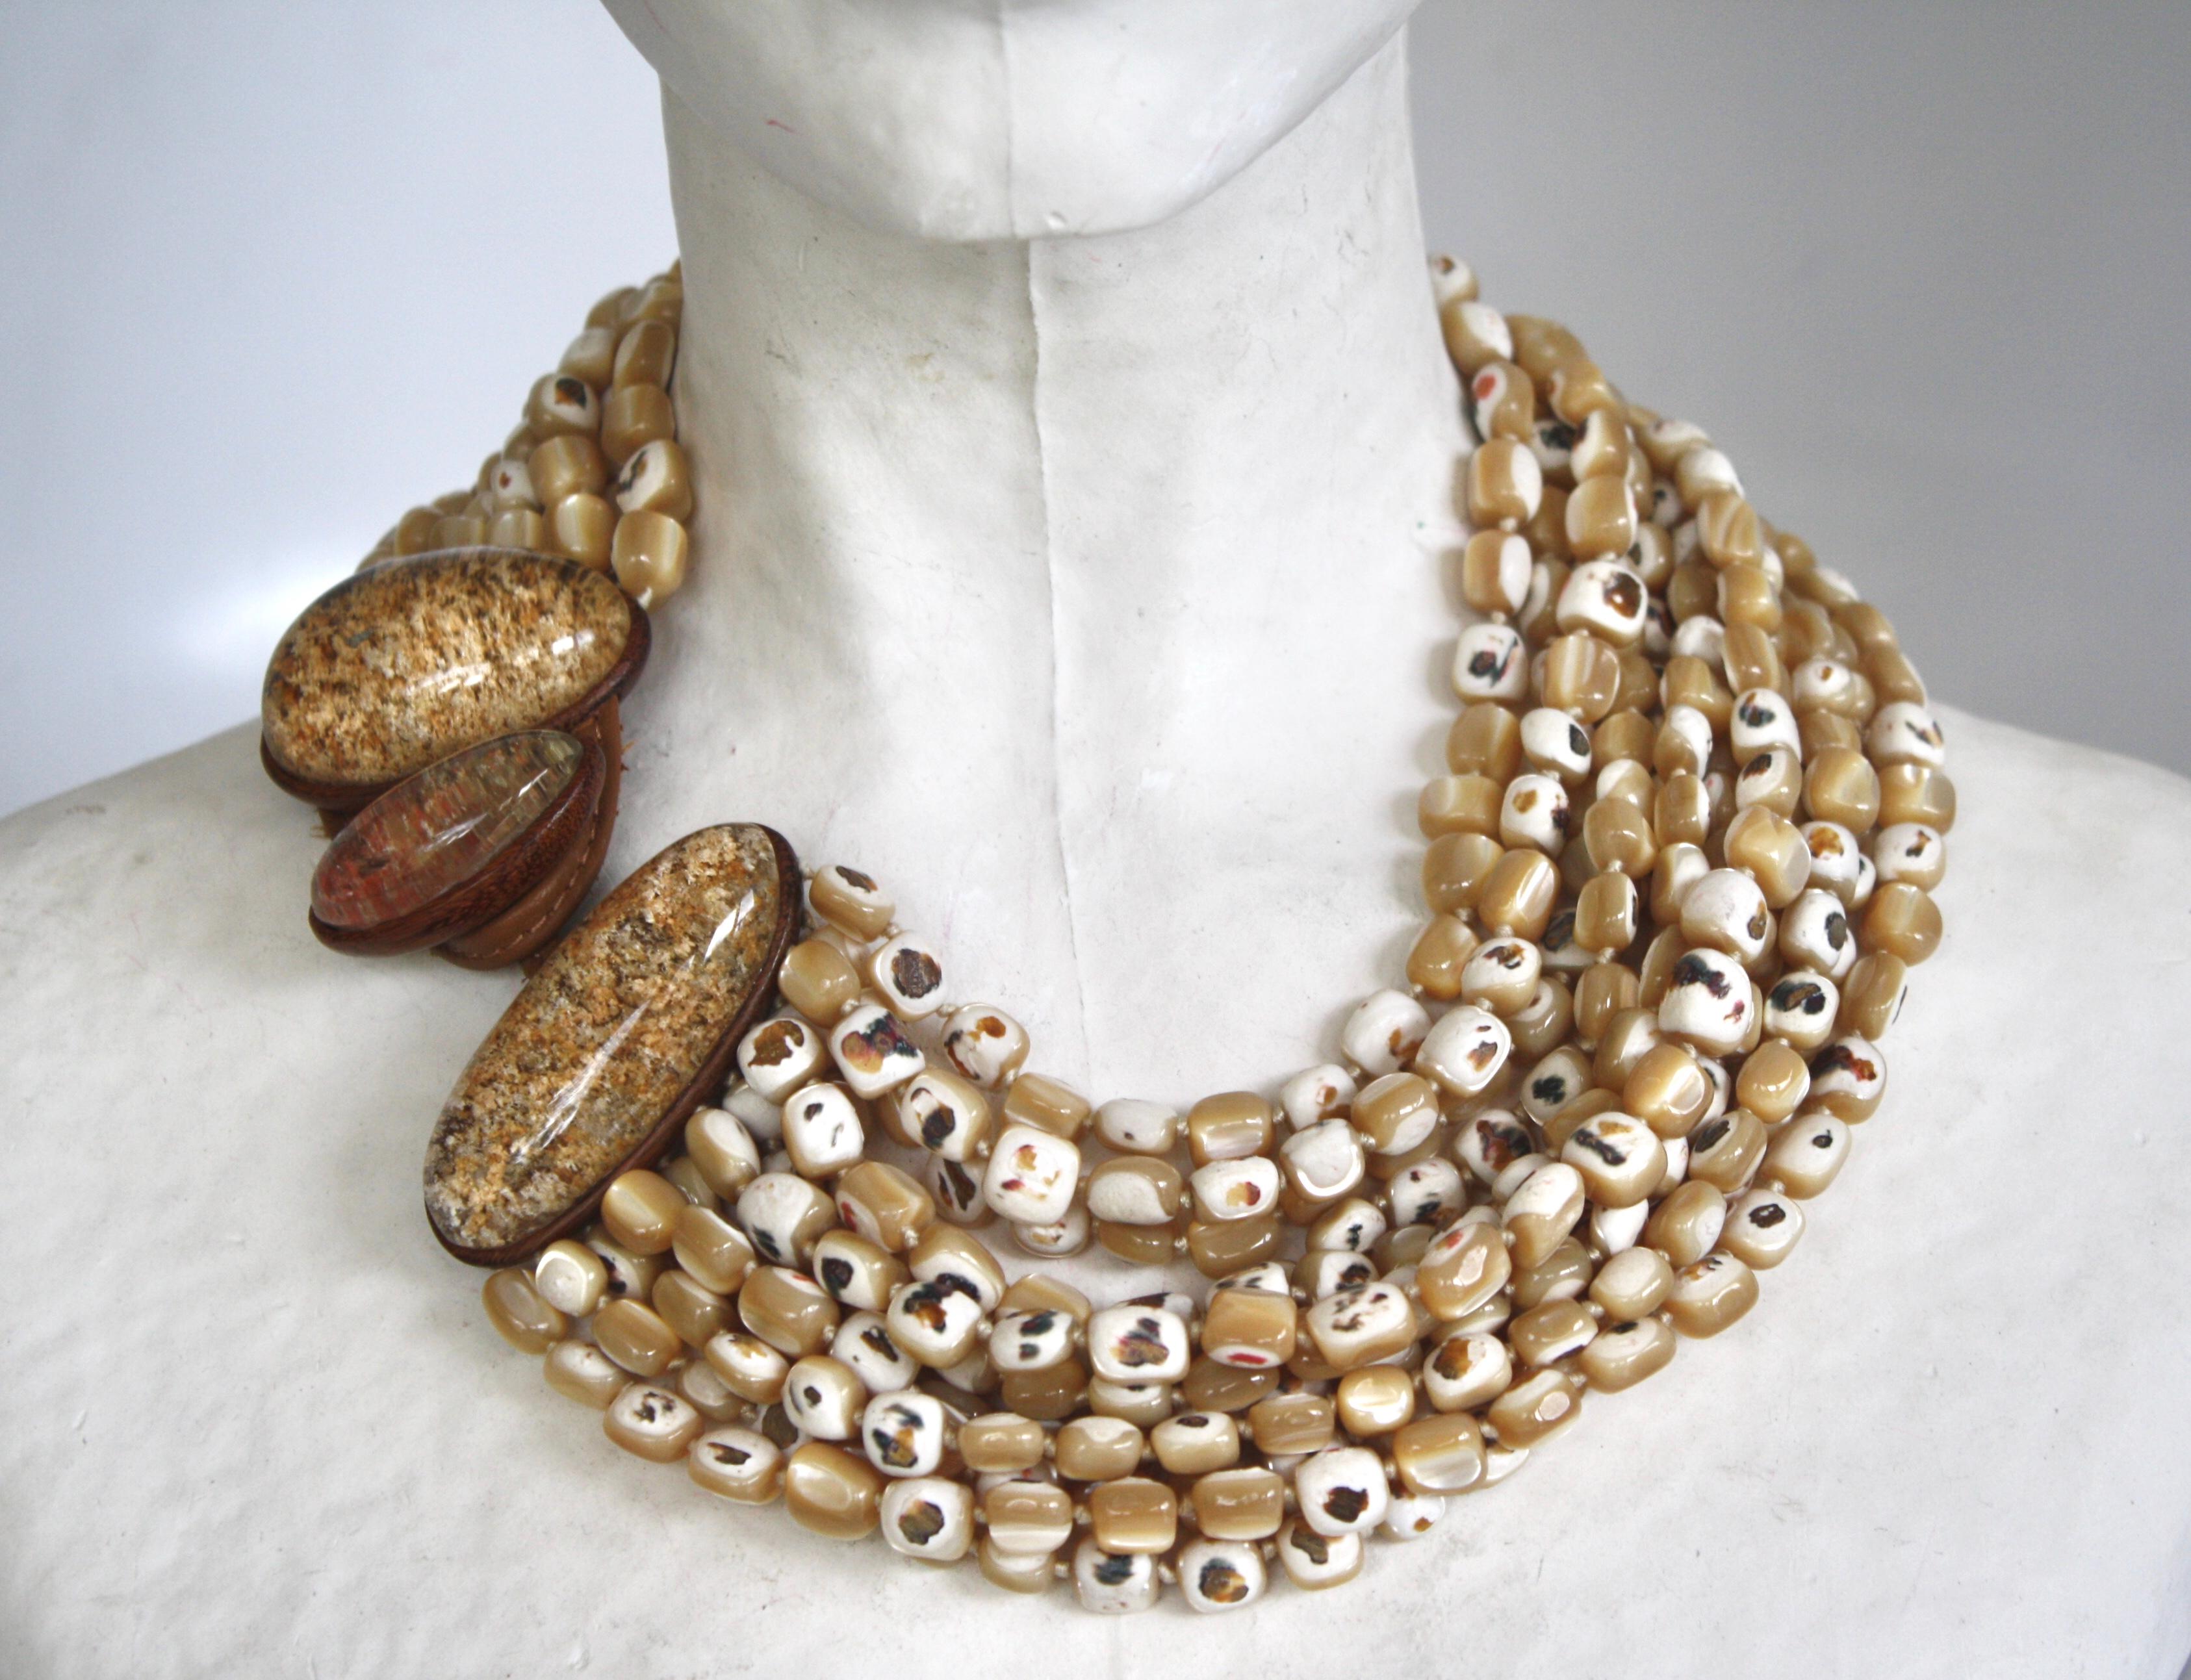 Mother of Pearl, mountain crystal, and azobe 12 strand statement necklace from Monies Denmark. 